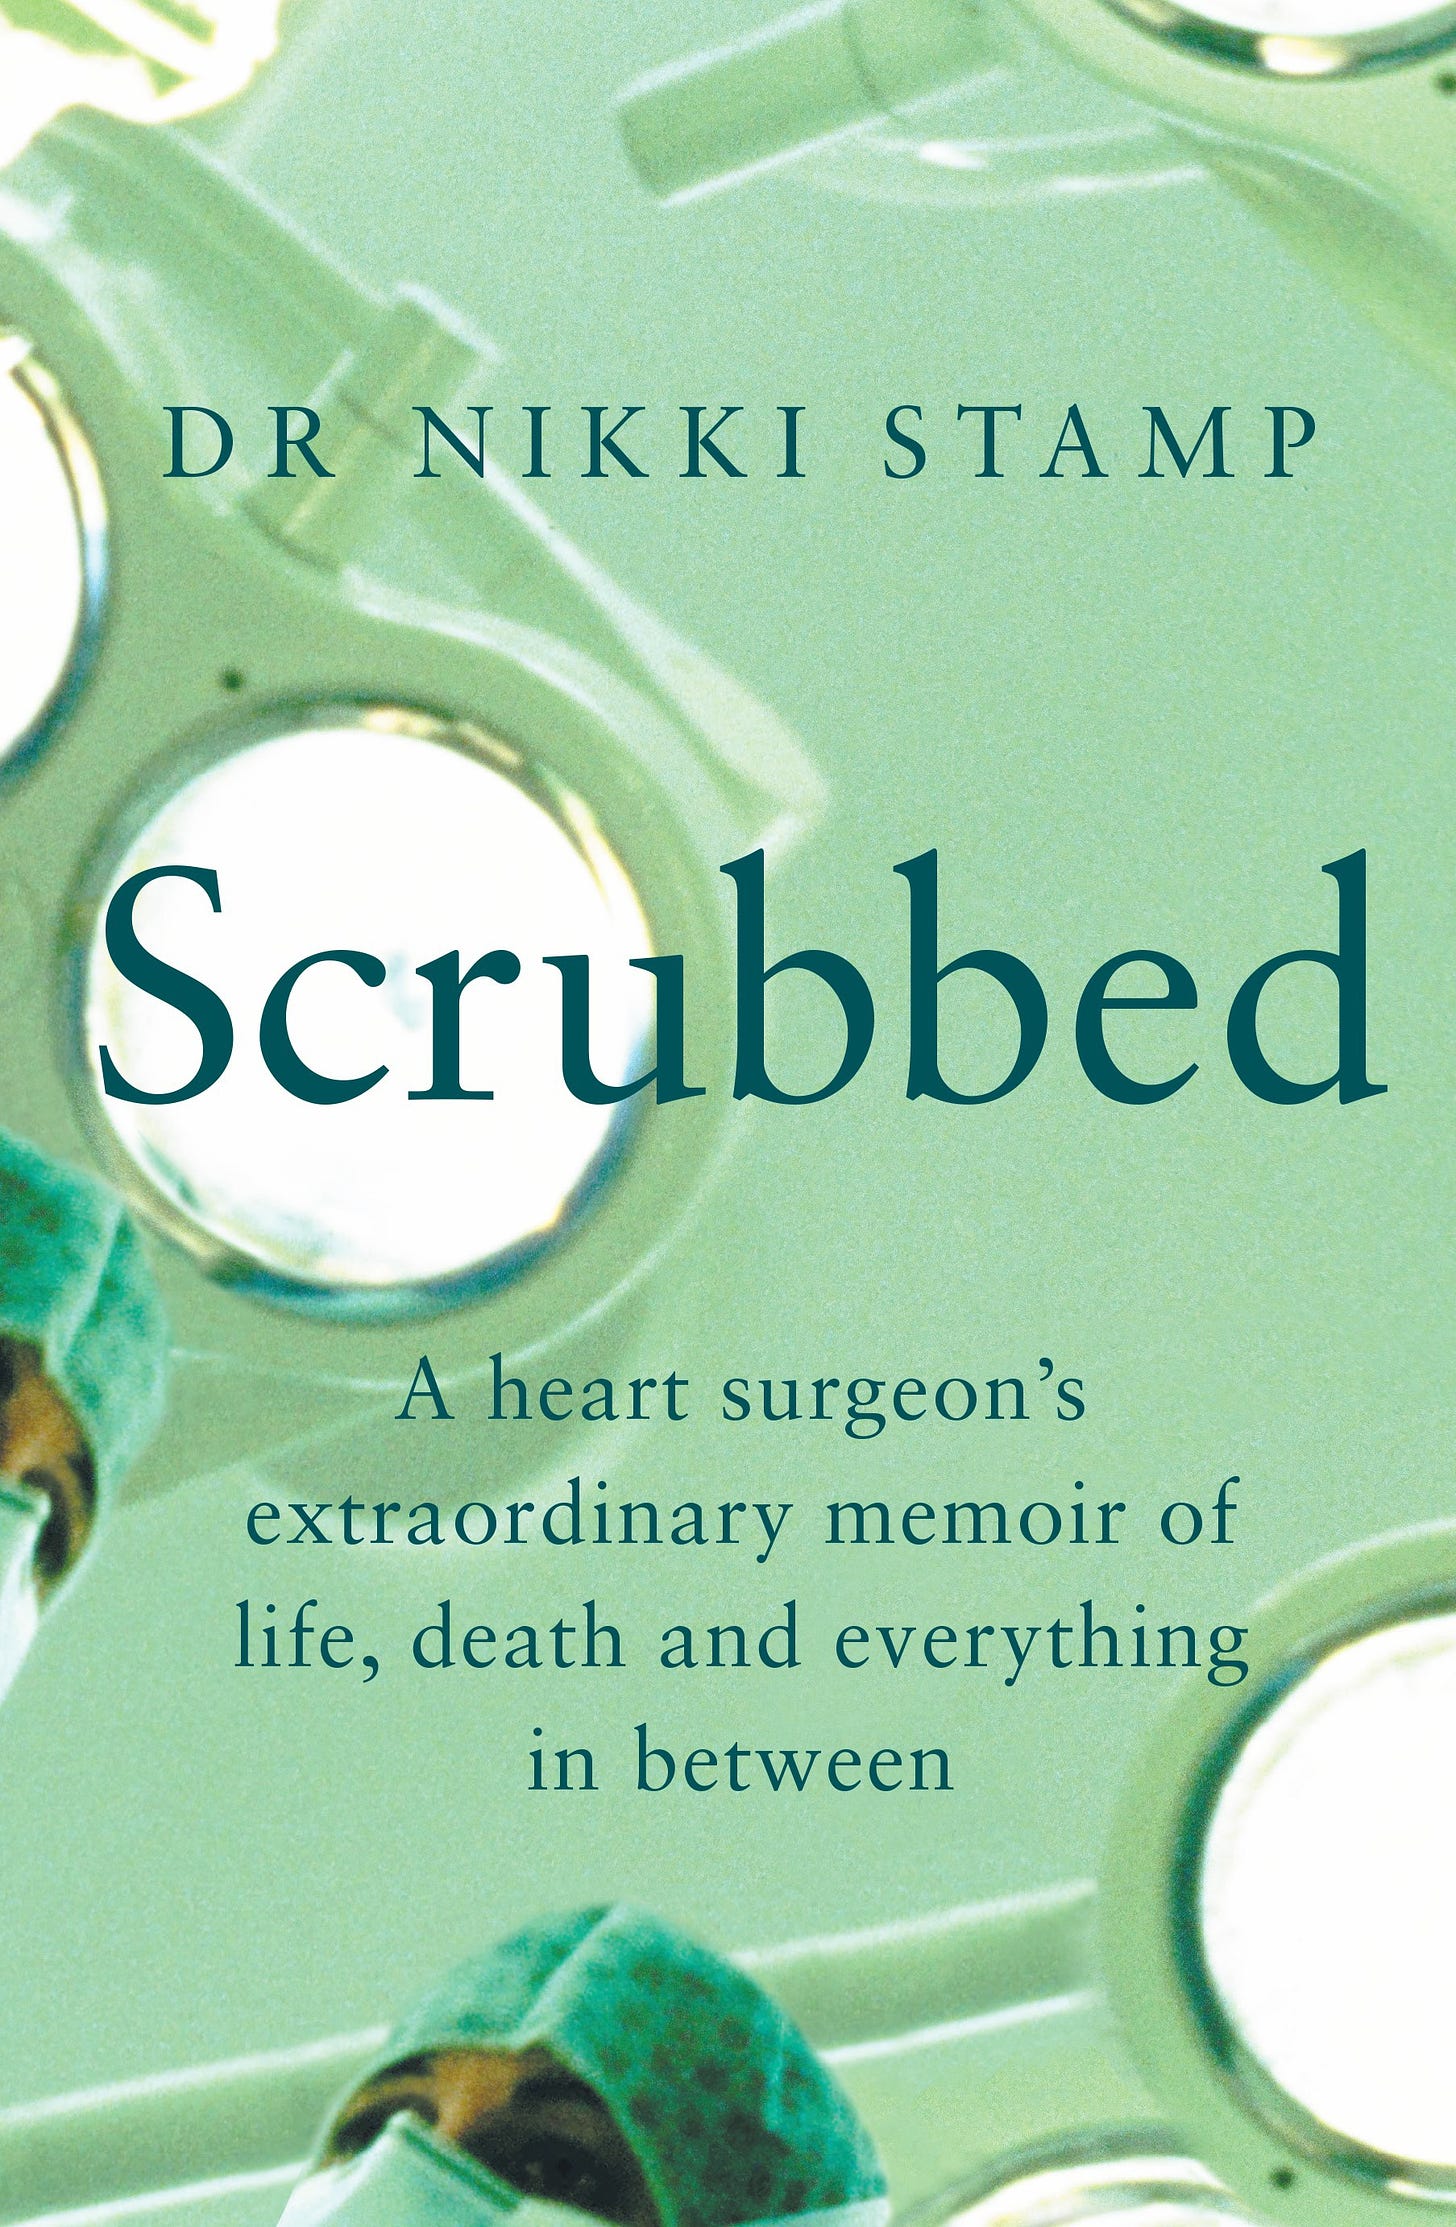 Book cover of Scrubbed by Dr Nikki Stamp. Text reads: a heart surgeon's extraordinary memoir of life, death and everything in between